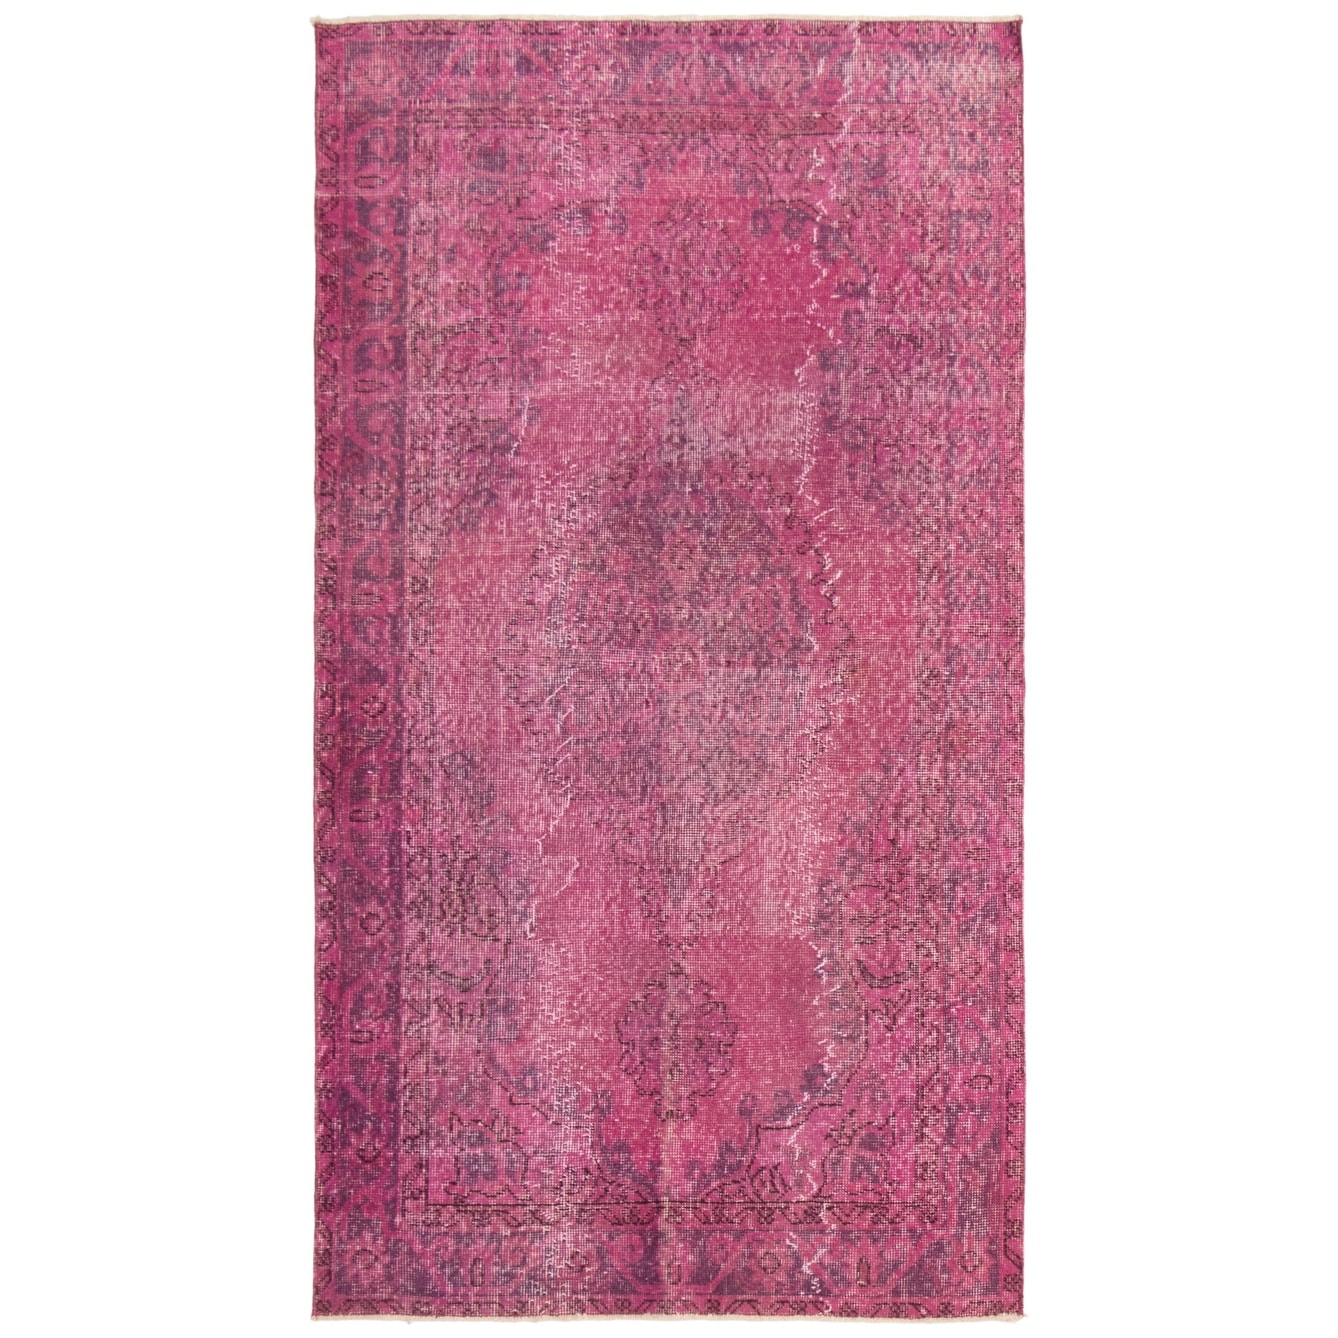 ECARPETGALLERY Hand-knotted Color Transition Violet Wool Rug - 3'7 x 6'8